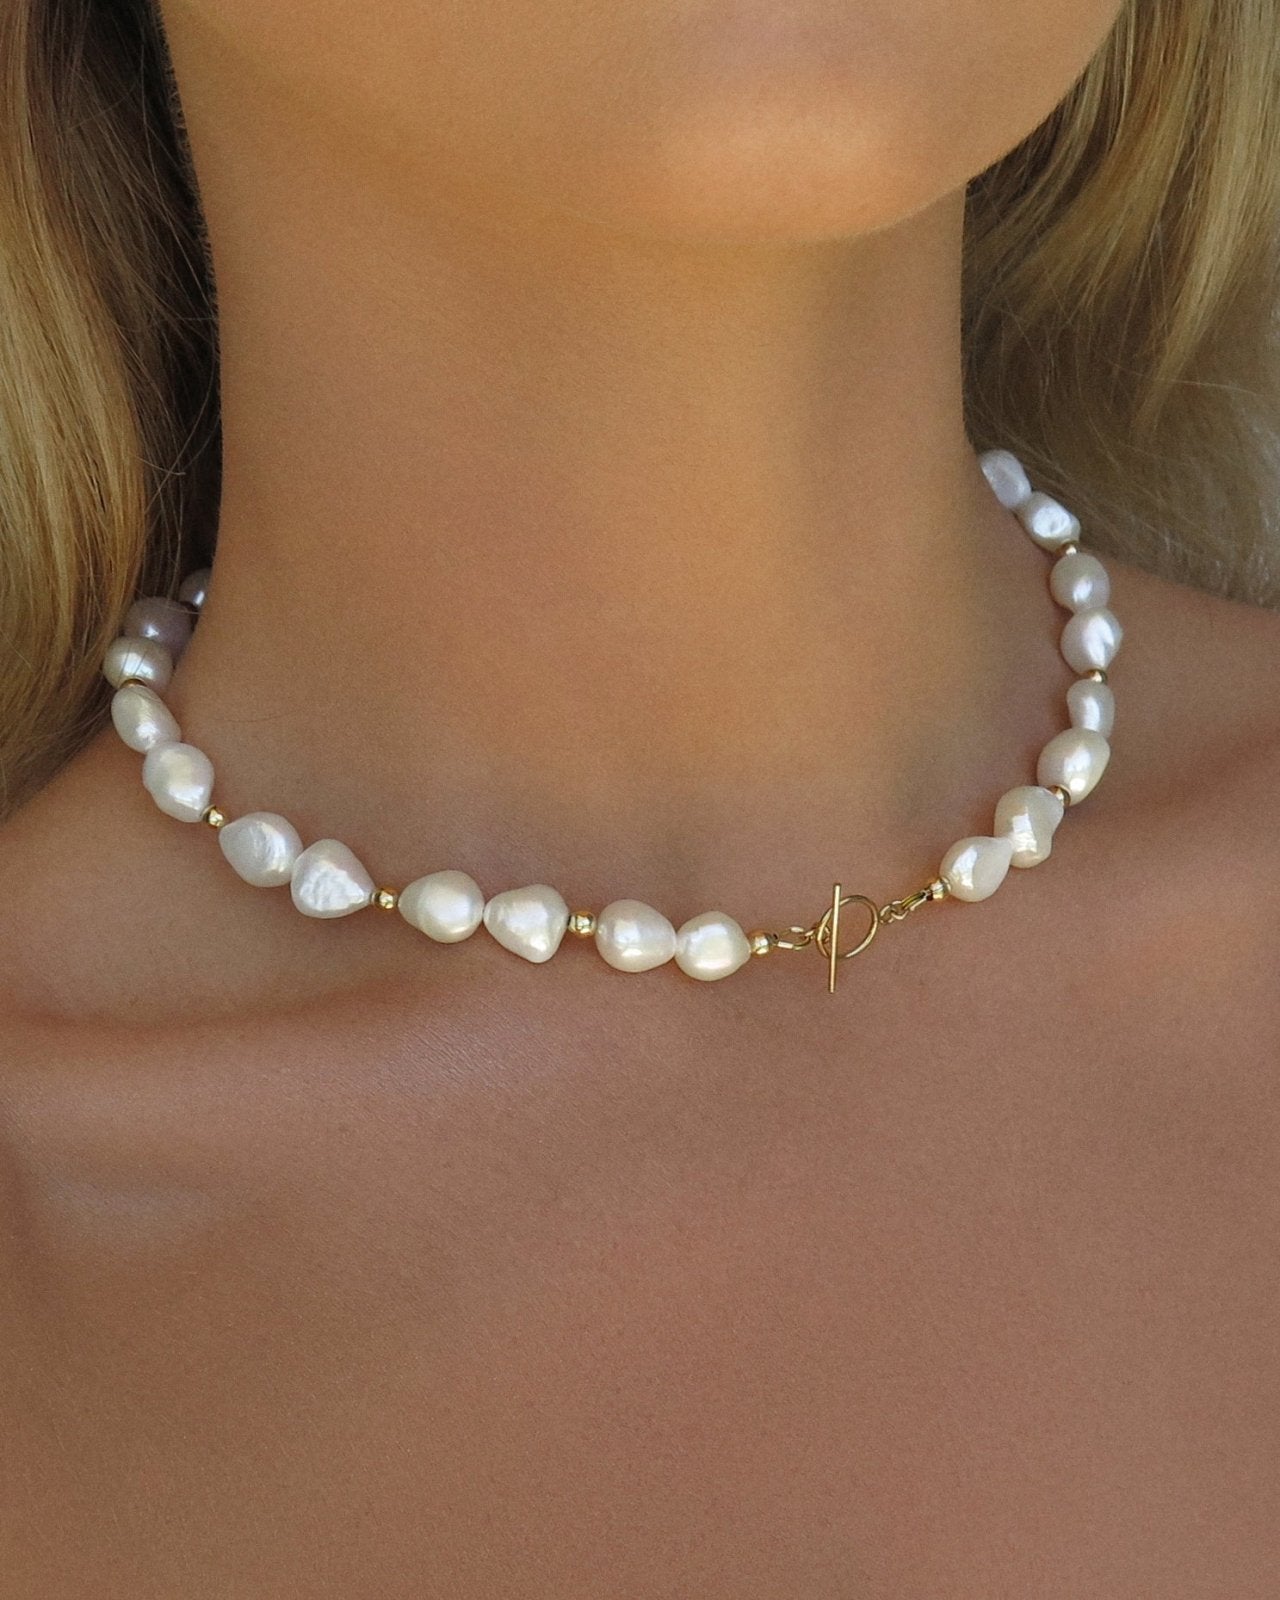 Load image into Gallery viewer, AZALIA FRESHWATER PEARL NECKLACE - The Littl - 14k Yellow Gold Fill - 42cm
